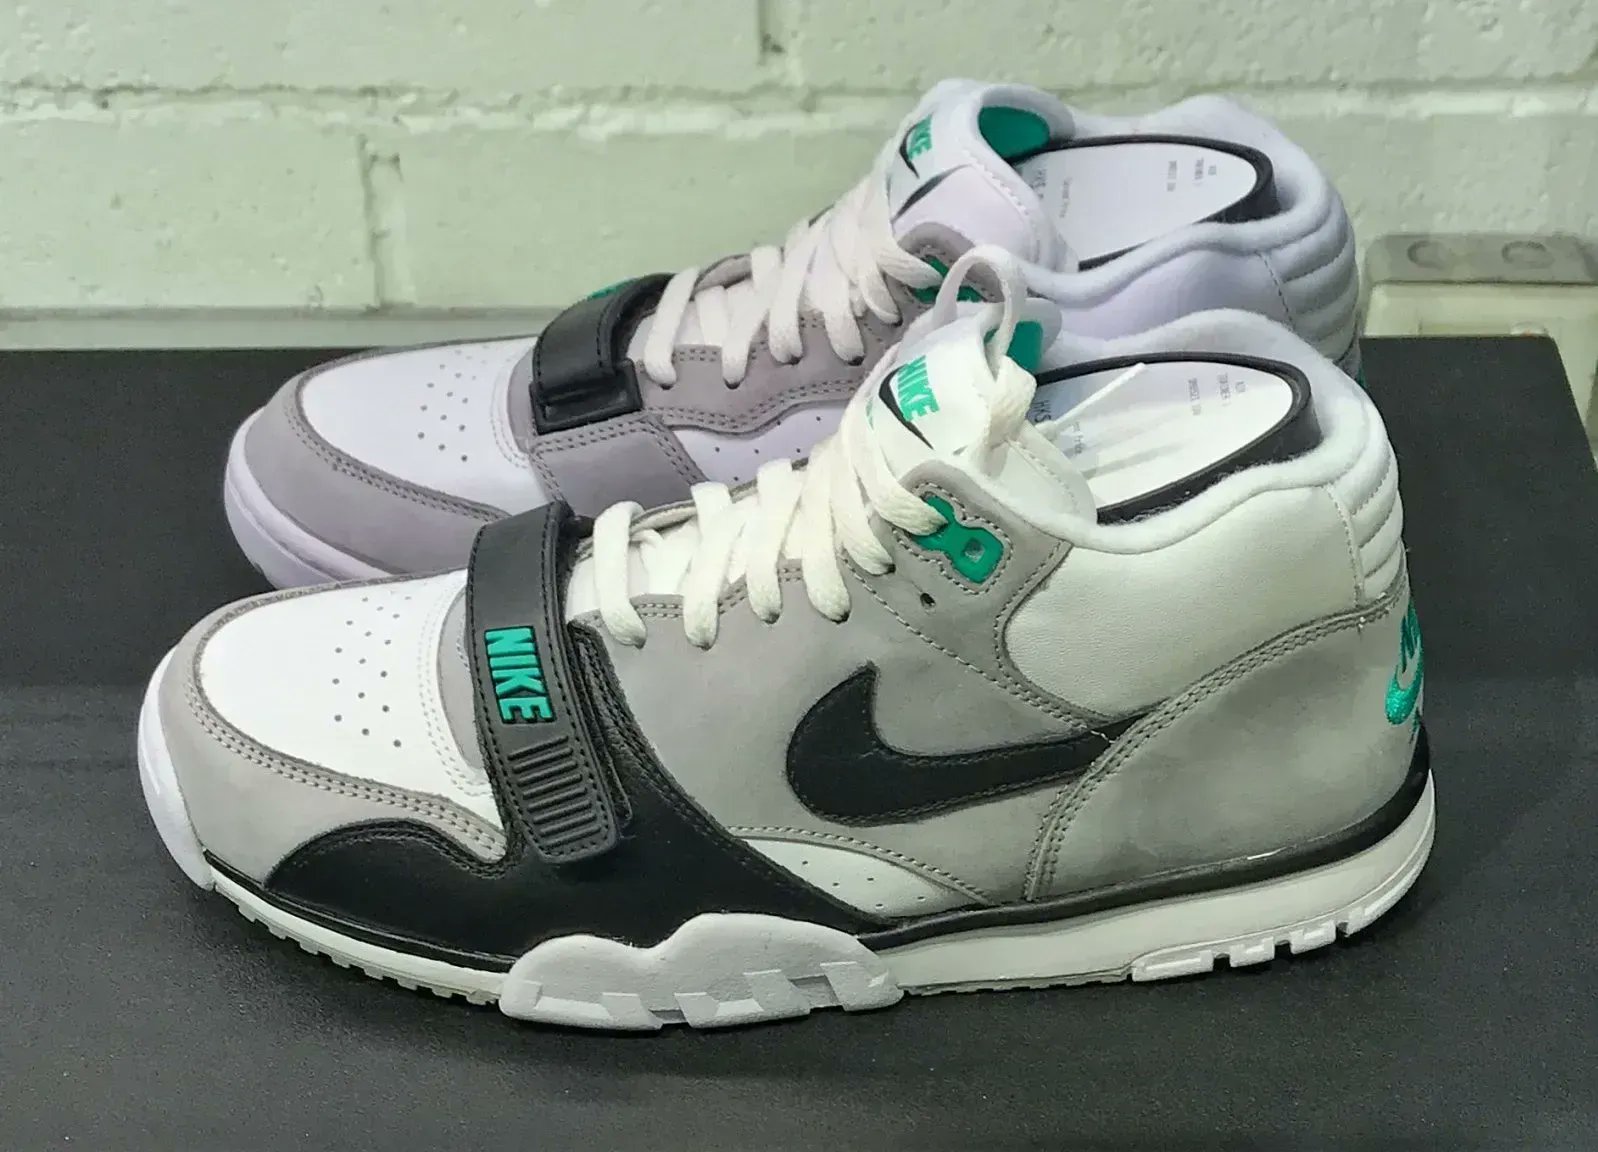 Seguid así perecer fricción JustFreshKicks on Twitter: "Nike Air Trainer 1 Mid “Chlorophyll” Returning  for 35th Anniversary https://t.co/9AlWUTqACk https://t.co/WuhtmxIduZ" /  Twitter